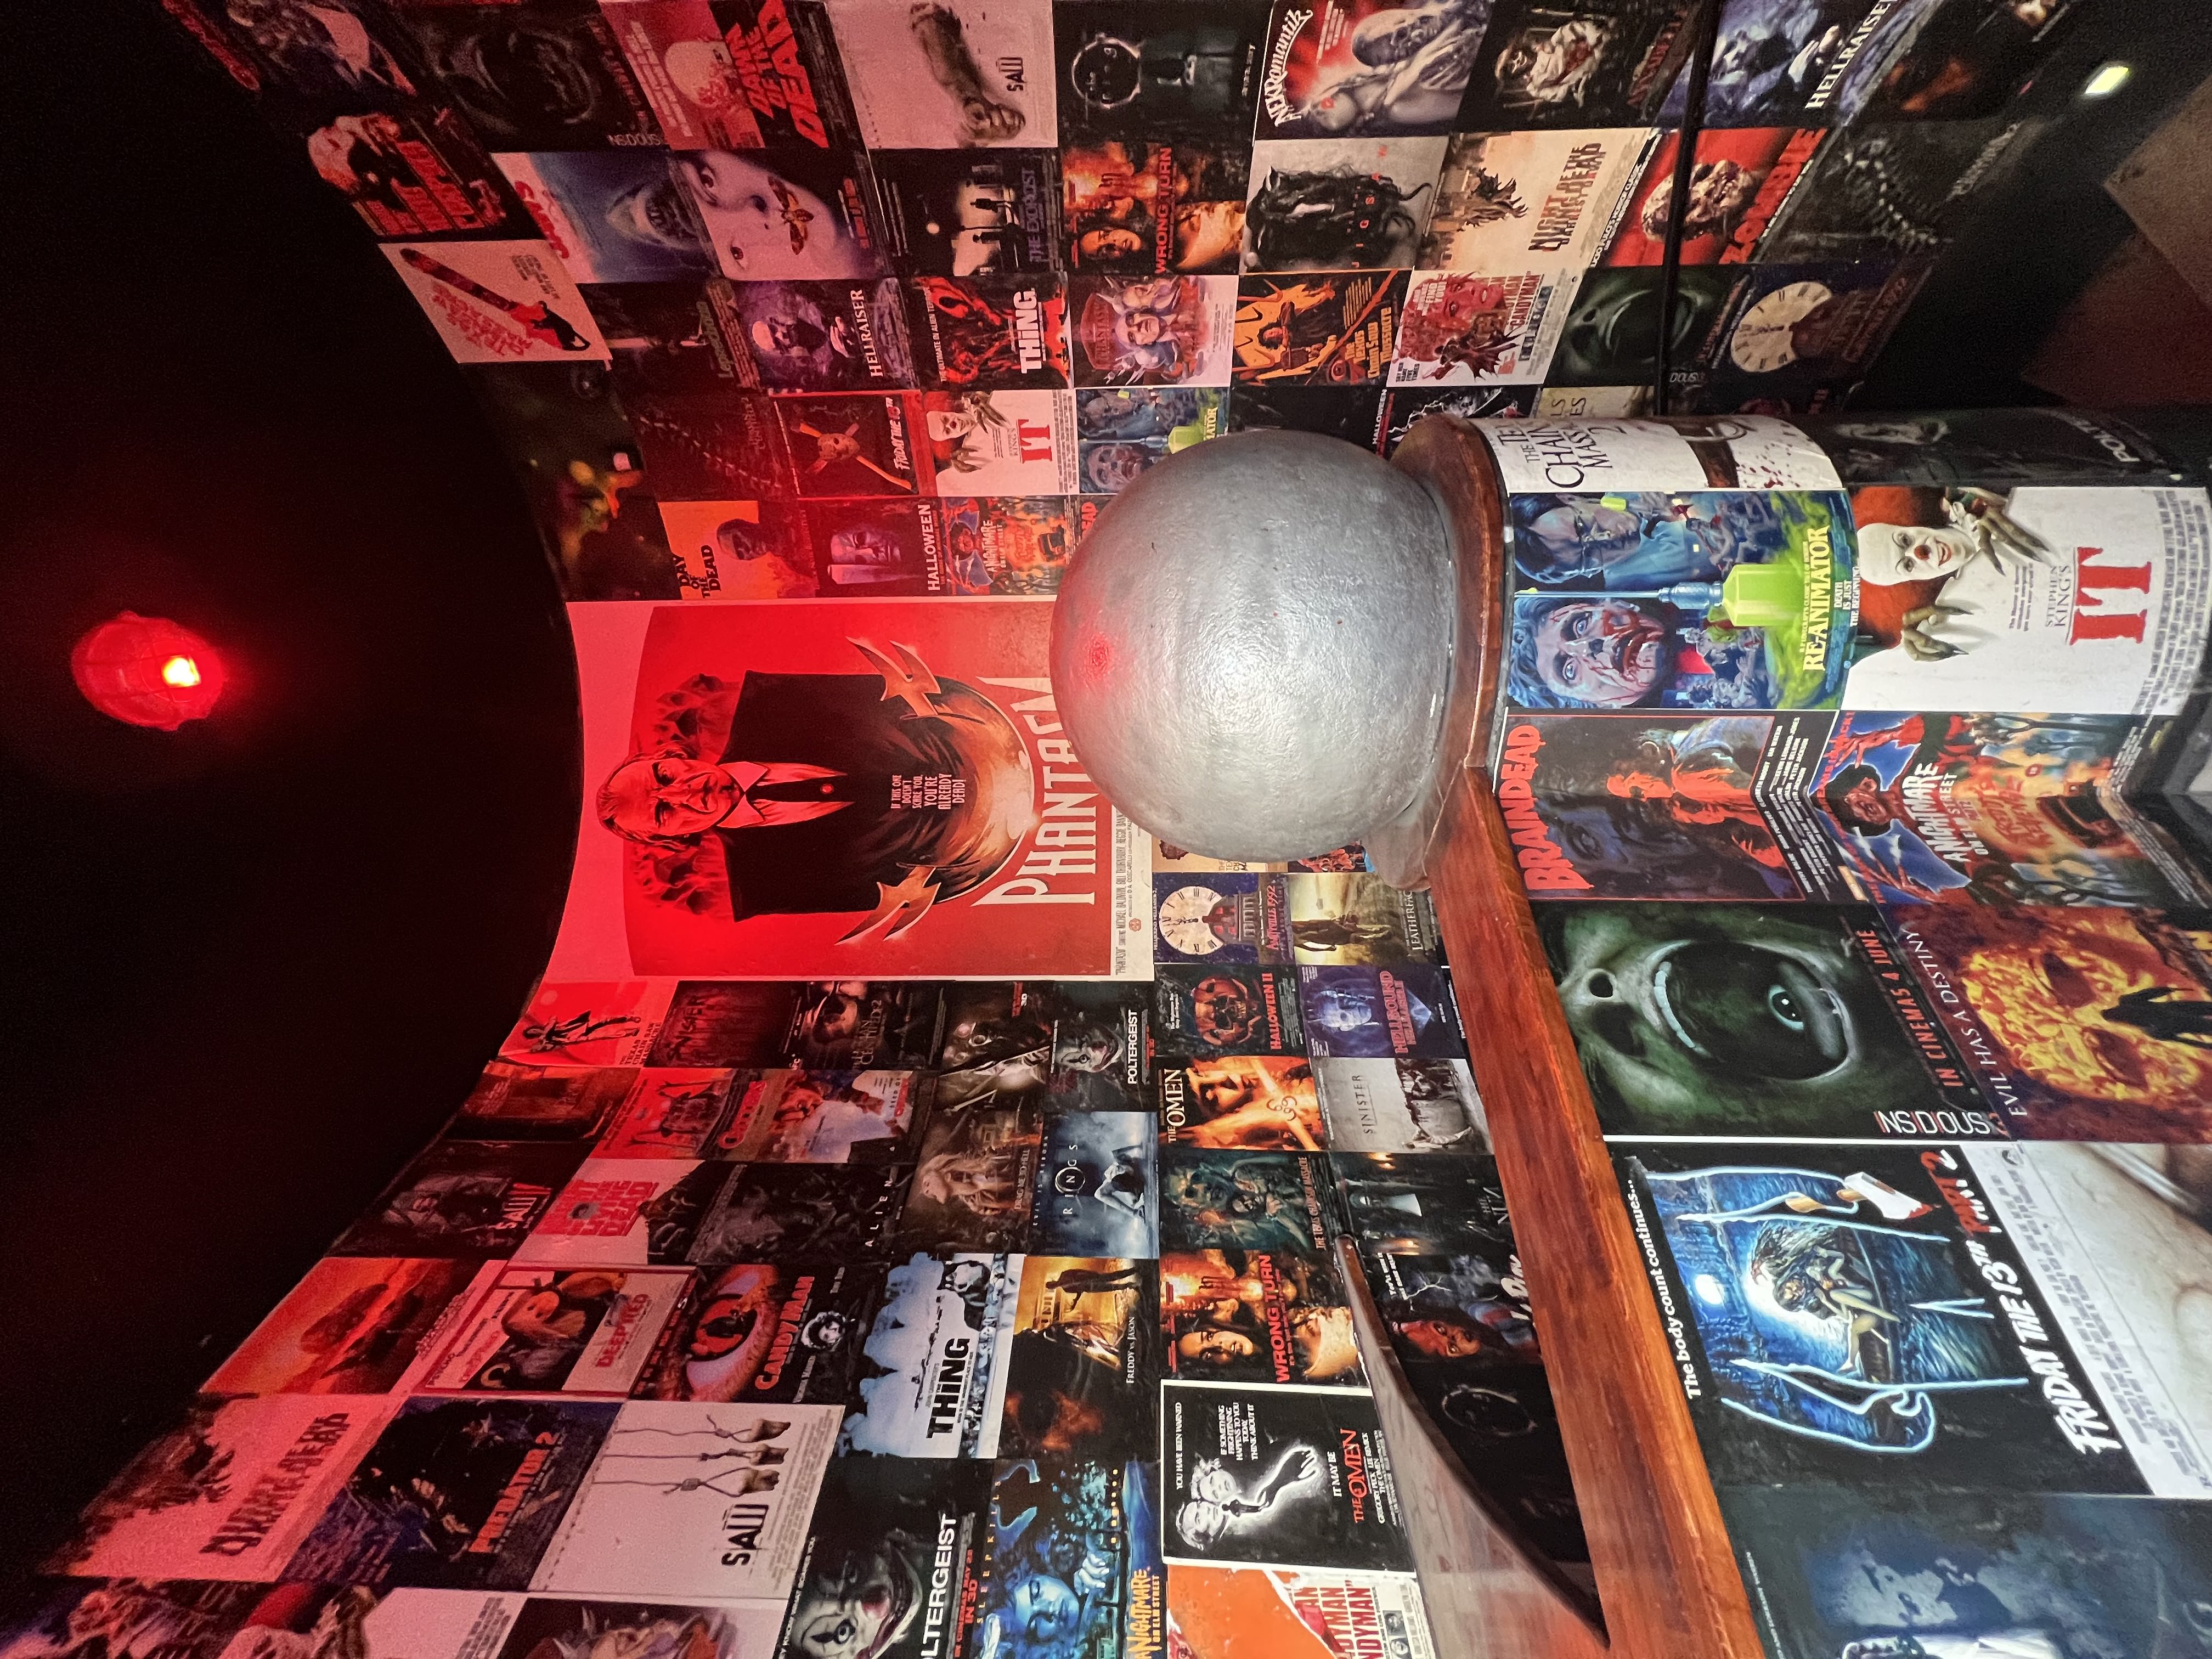 Image of entrance to Horror Bar Prague with dozens of horror posters on the walls before the spiral stairs to the bar